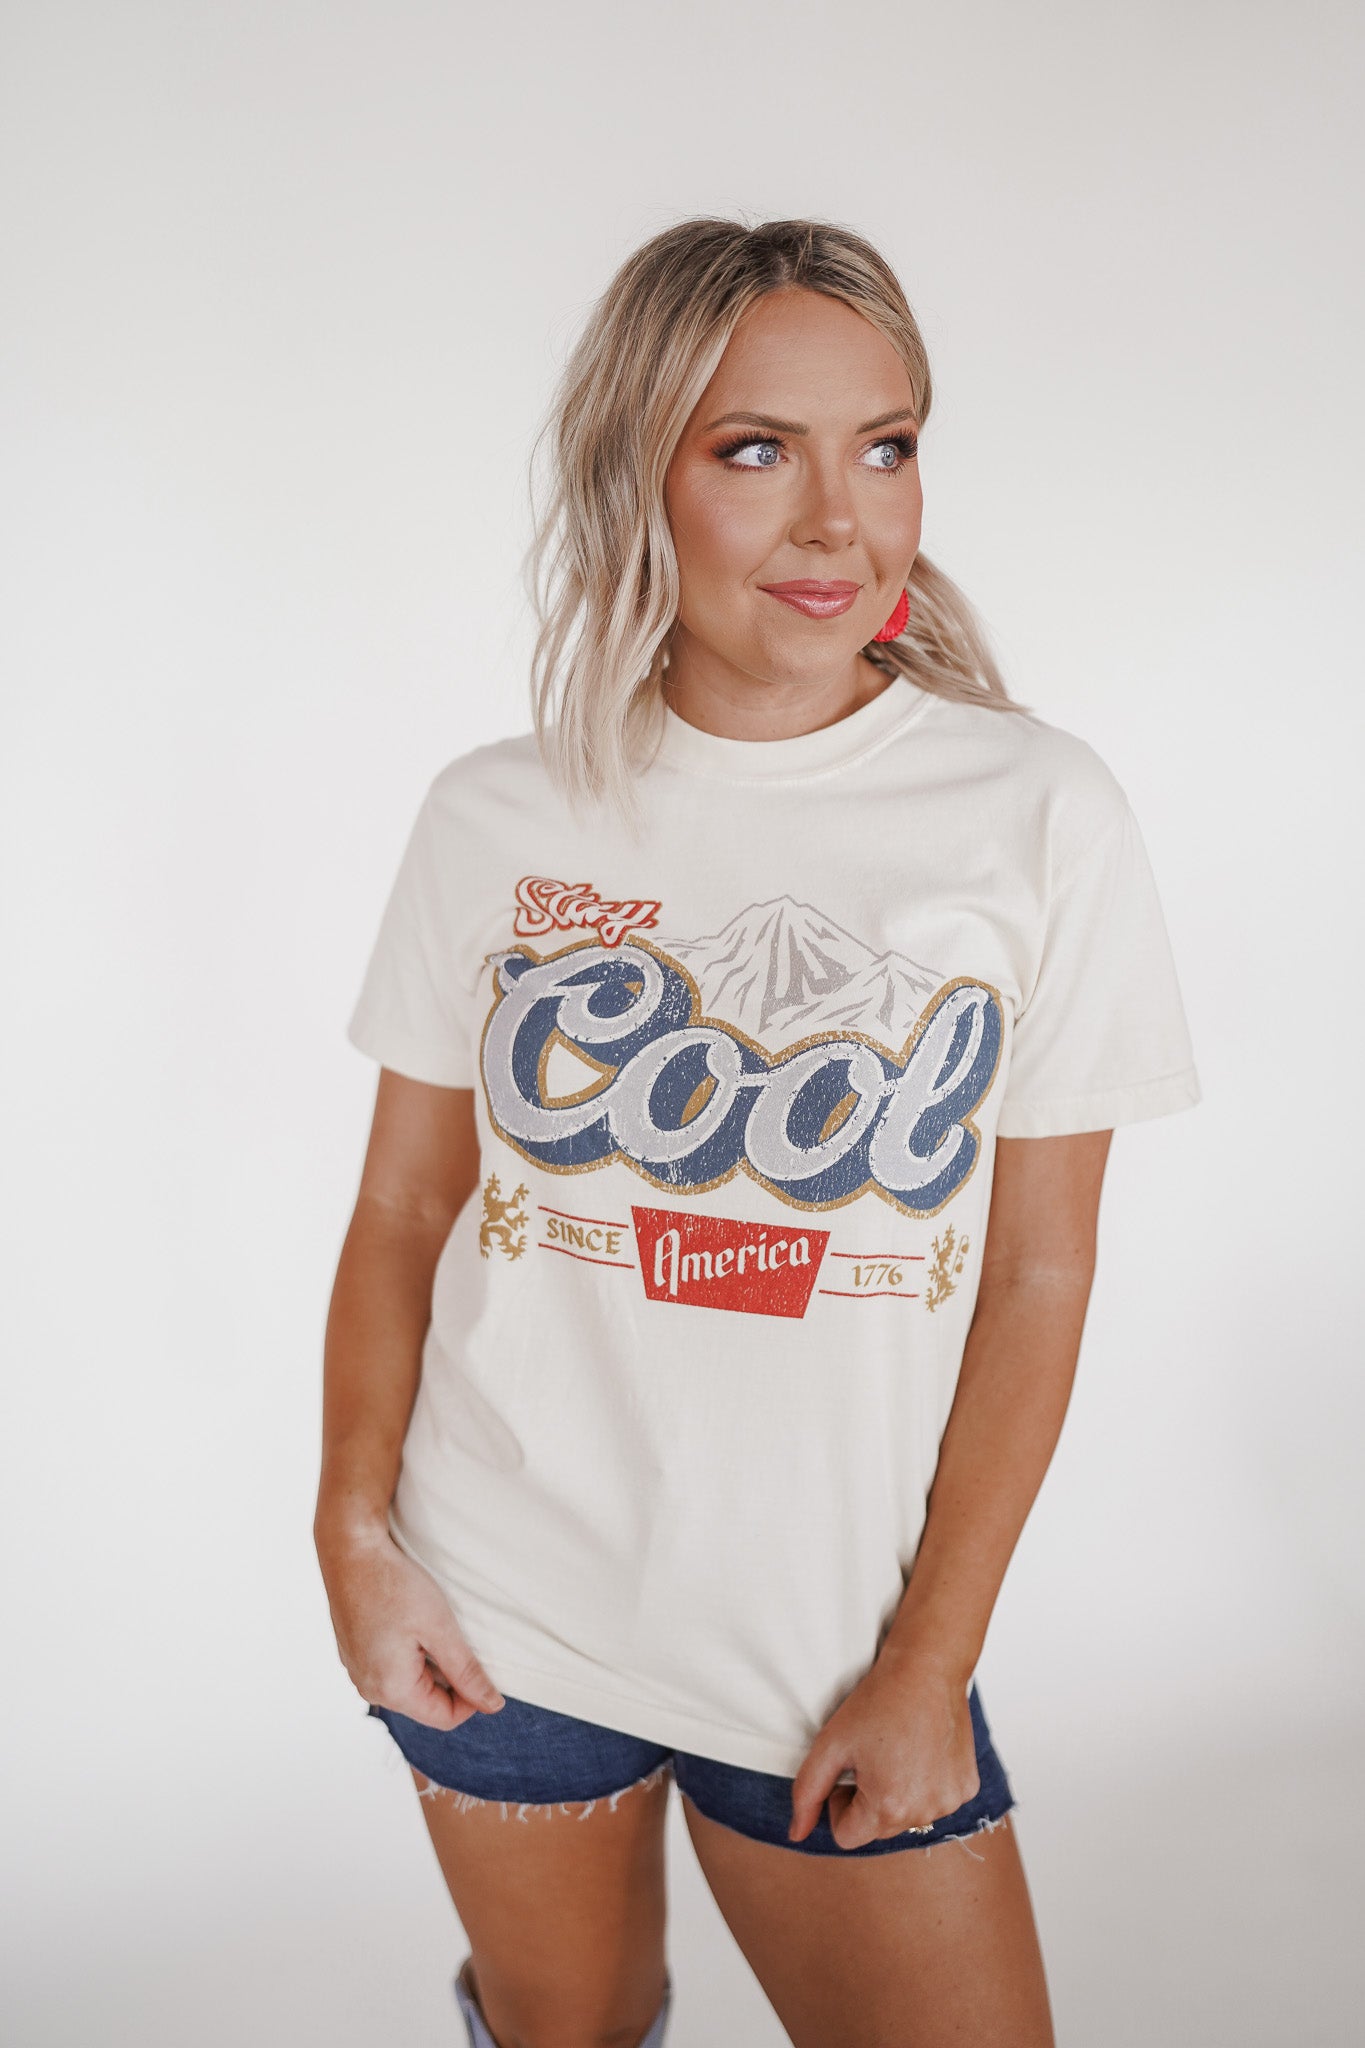 Stay Cool America Graphic Tee